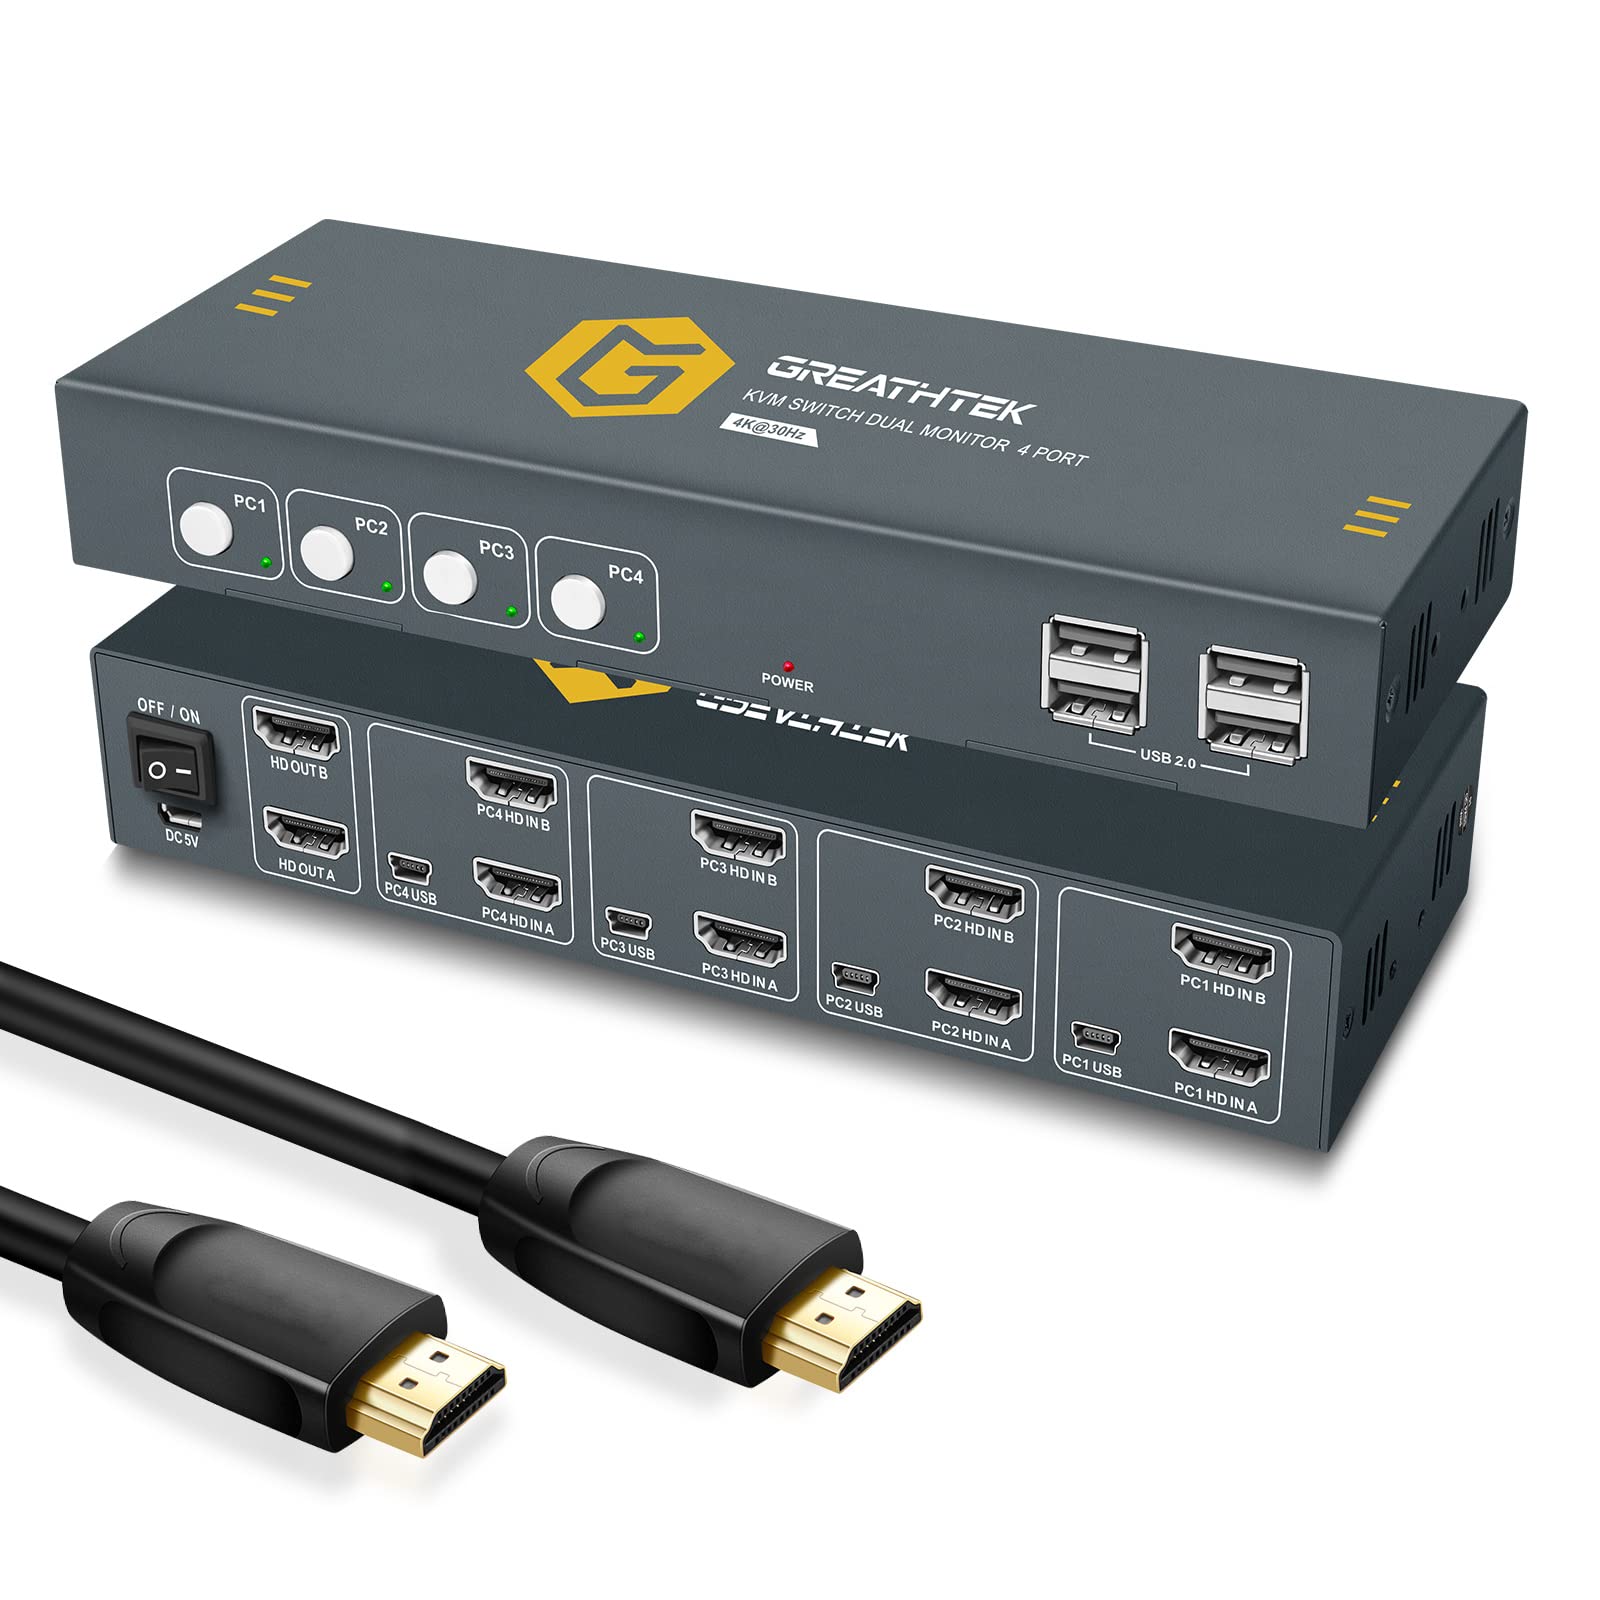 KVM Switch HDMI Dual Monitor Extended Display 4 Port, 4 USB 2.0 Hub, UHD 4K@30Hz Downward Compatible, Button Switch, with All Needed Cables, No Adapter Required